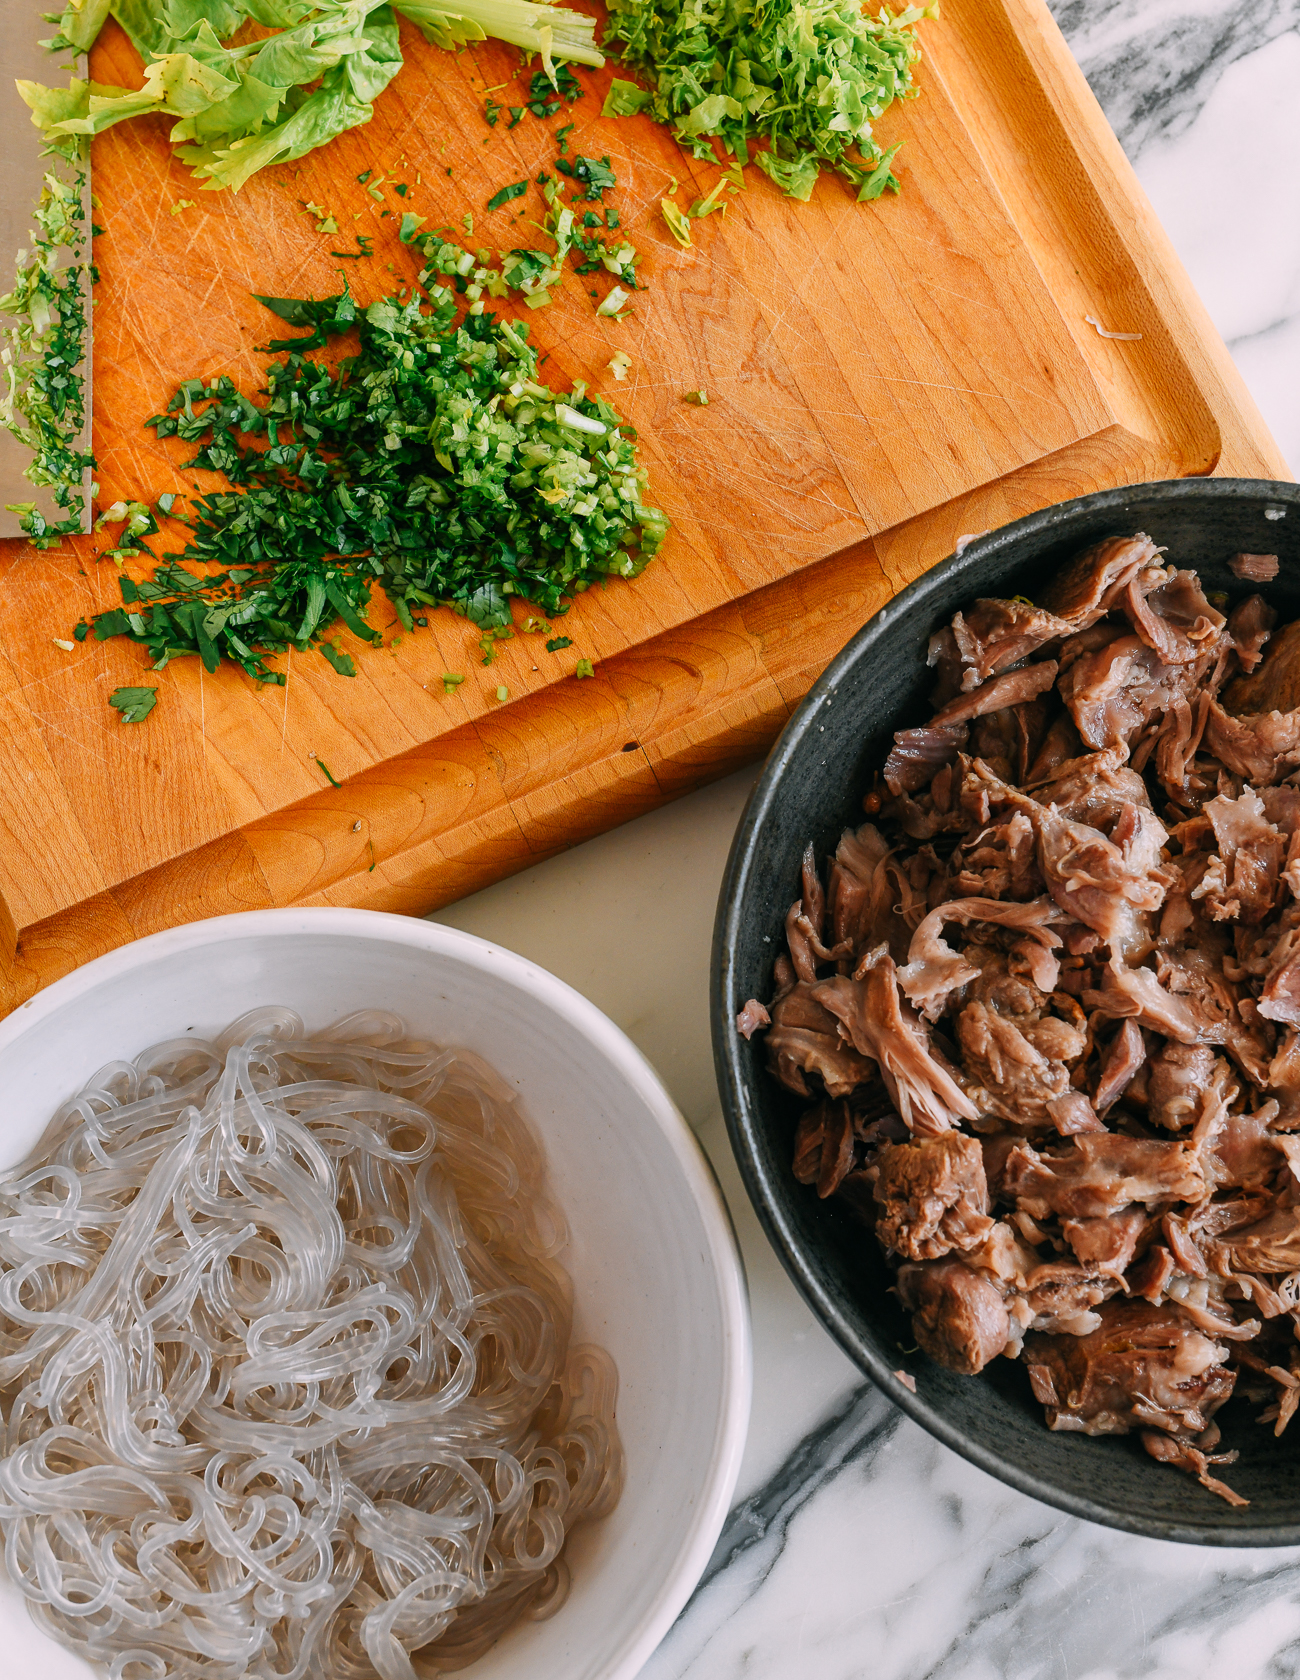 Boiled sweet potato glass noodles, chopped cilantro and celery, and lamb meat